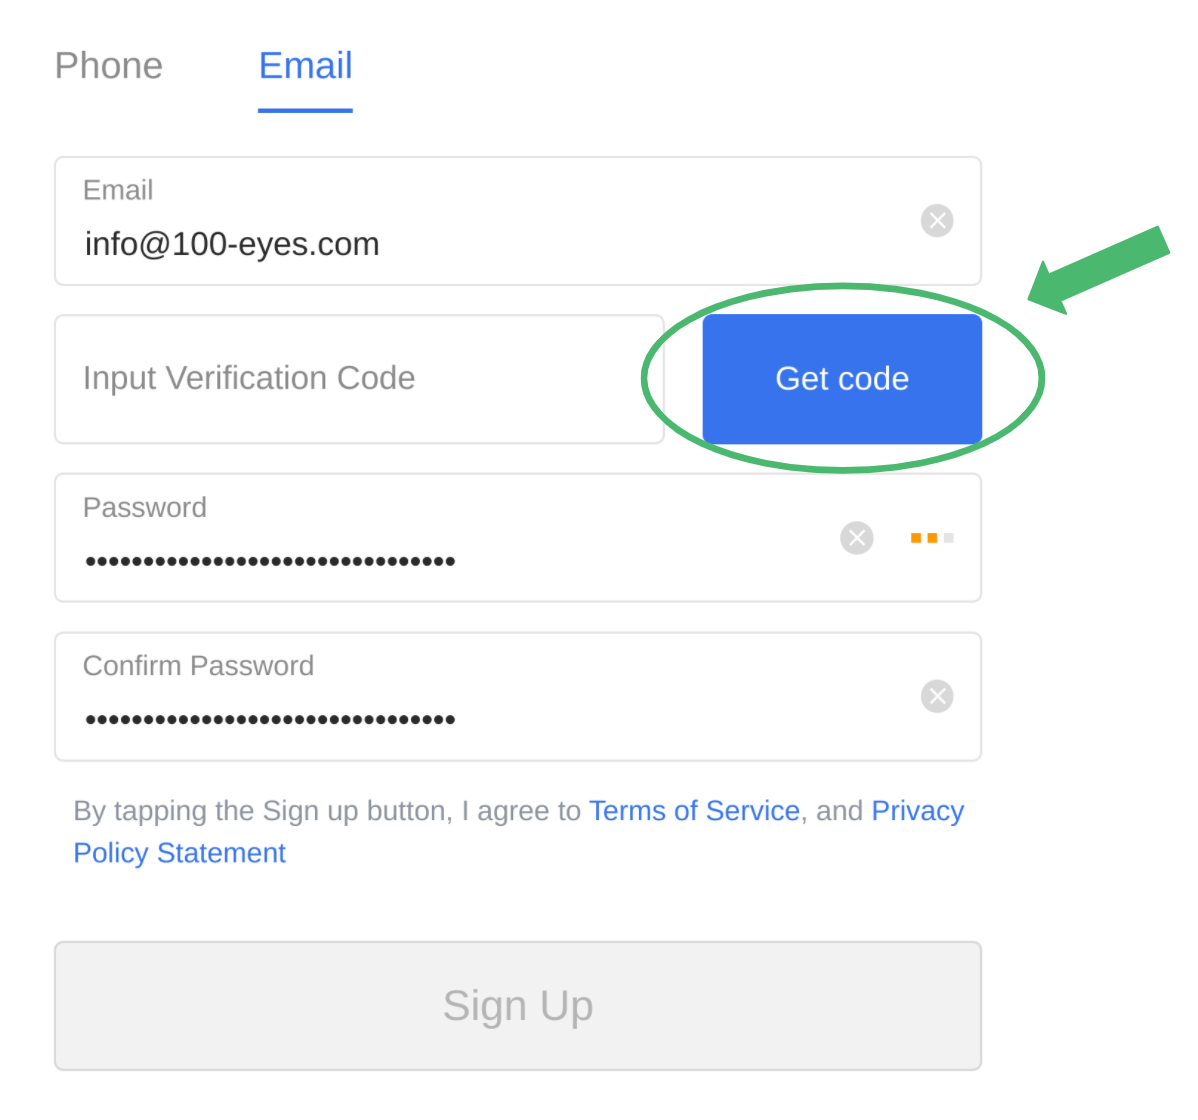 Step 2. After selecting Phone or Email to sign up, fill in your details and click on the Get code button